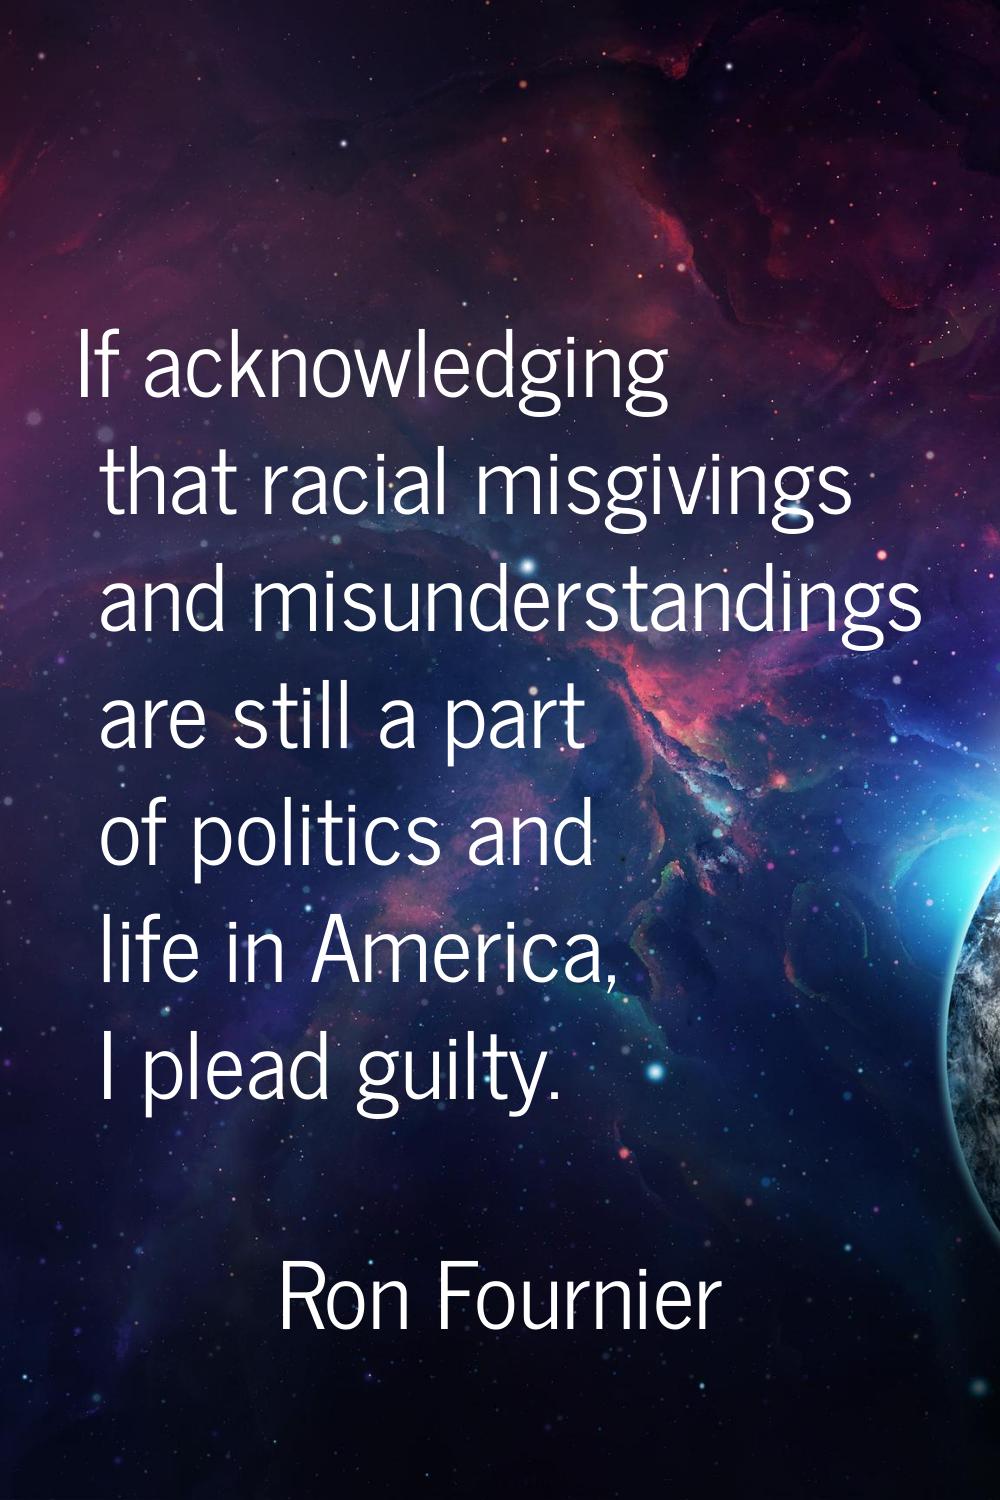 If acknowledging that racial misgivings and misunderstandings are still a part of politics and life